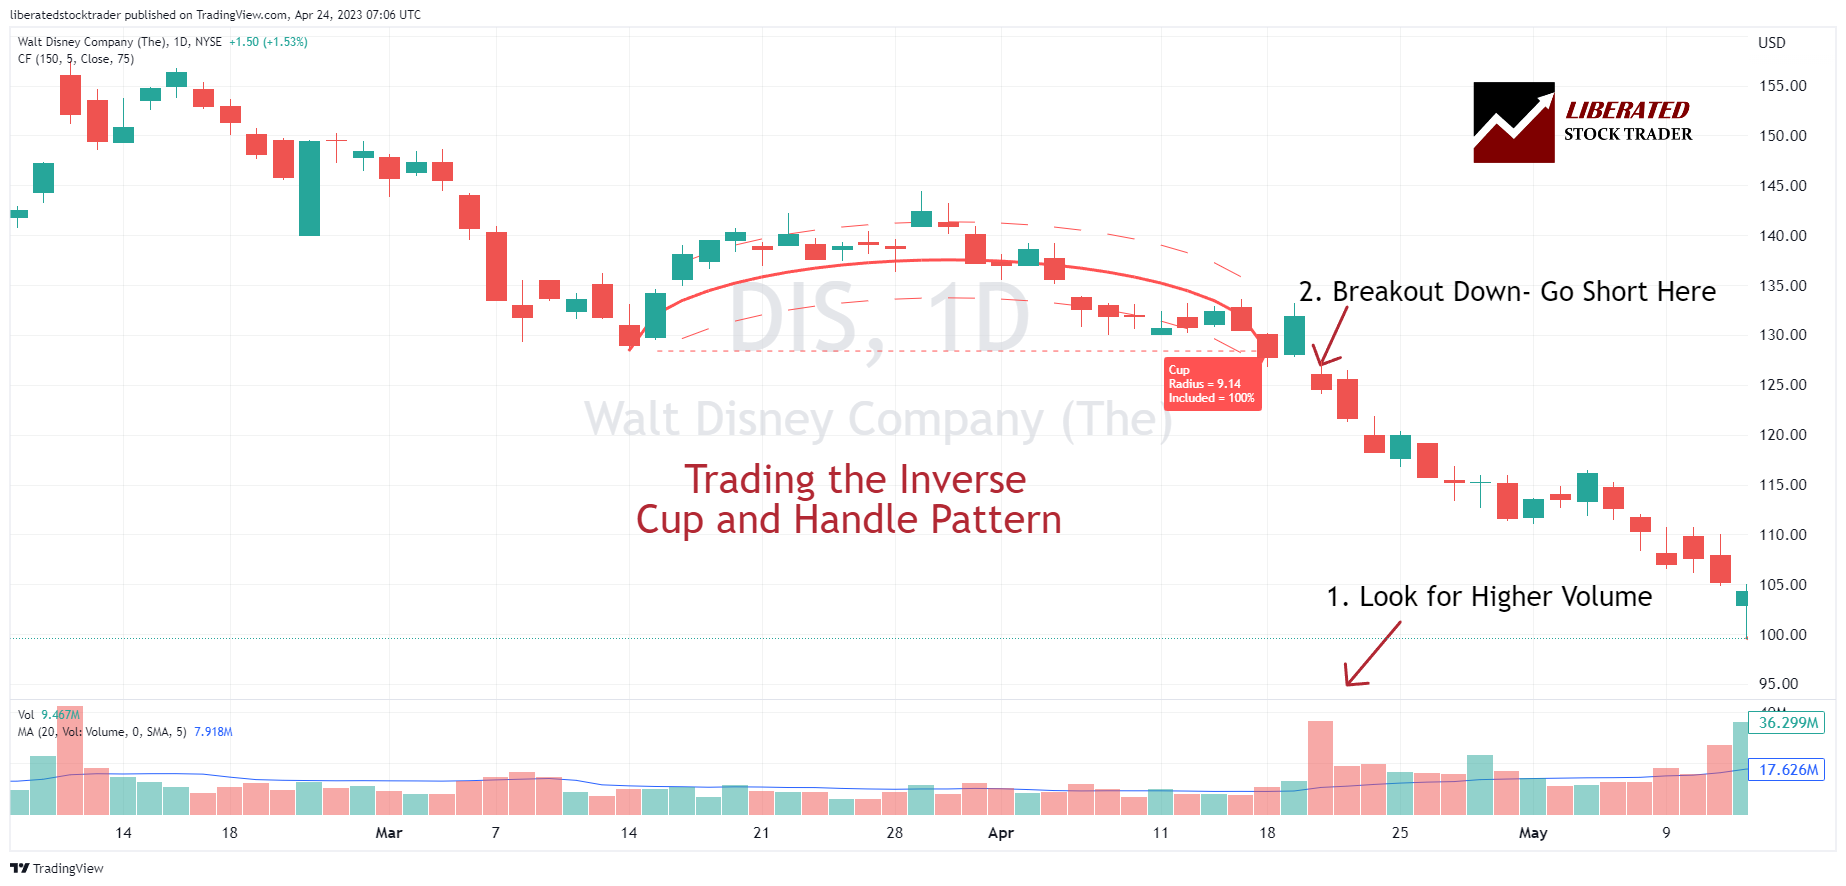 How to Trade the Bearish Cup and Handle Pattern